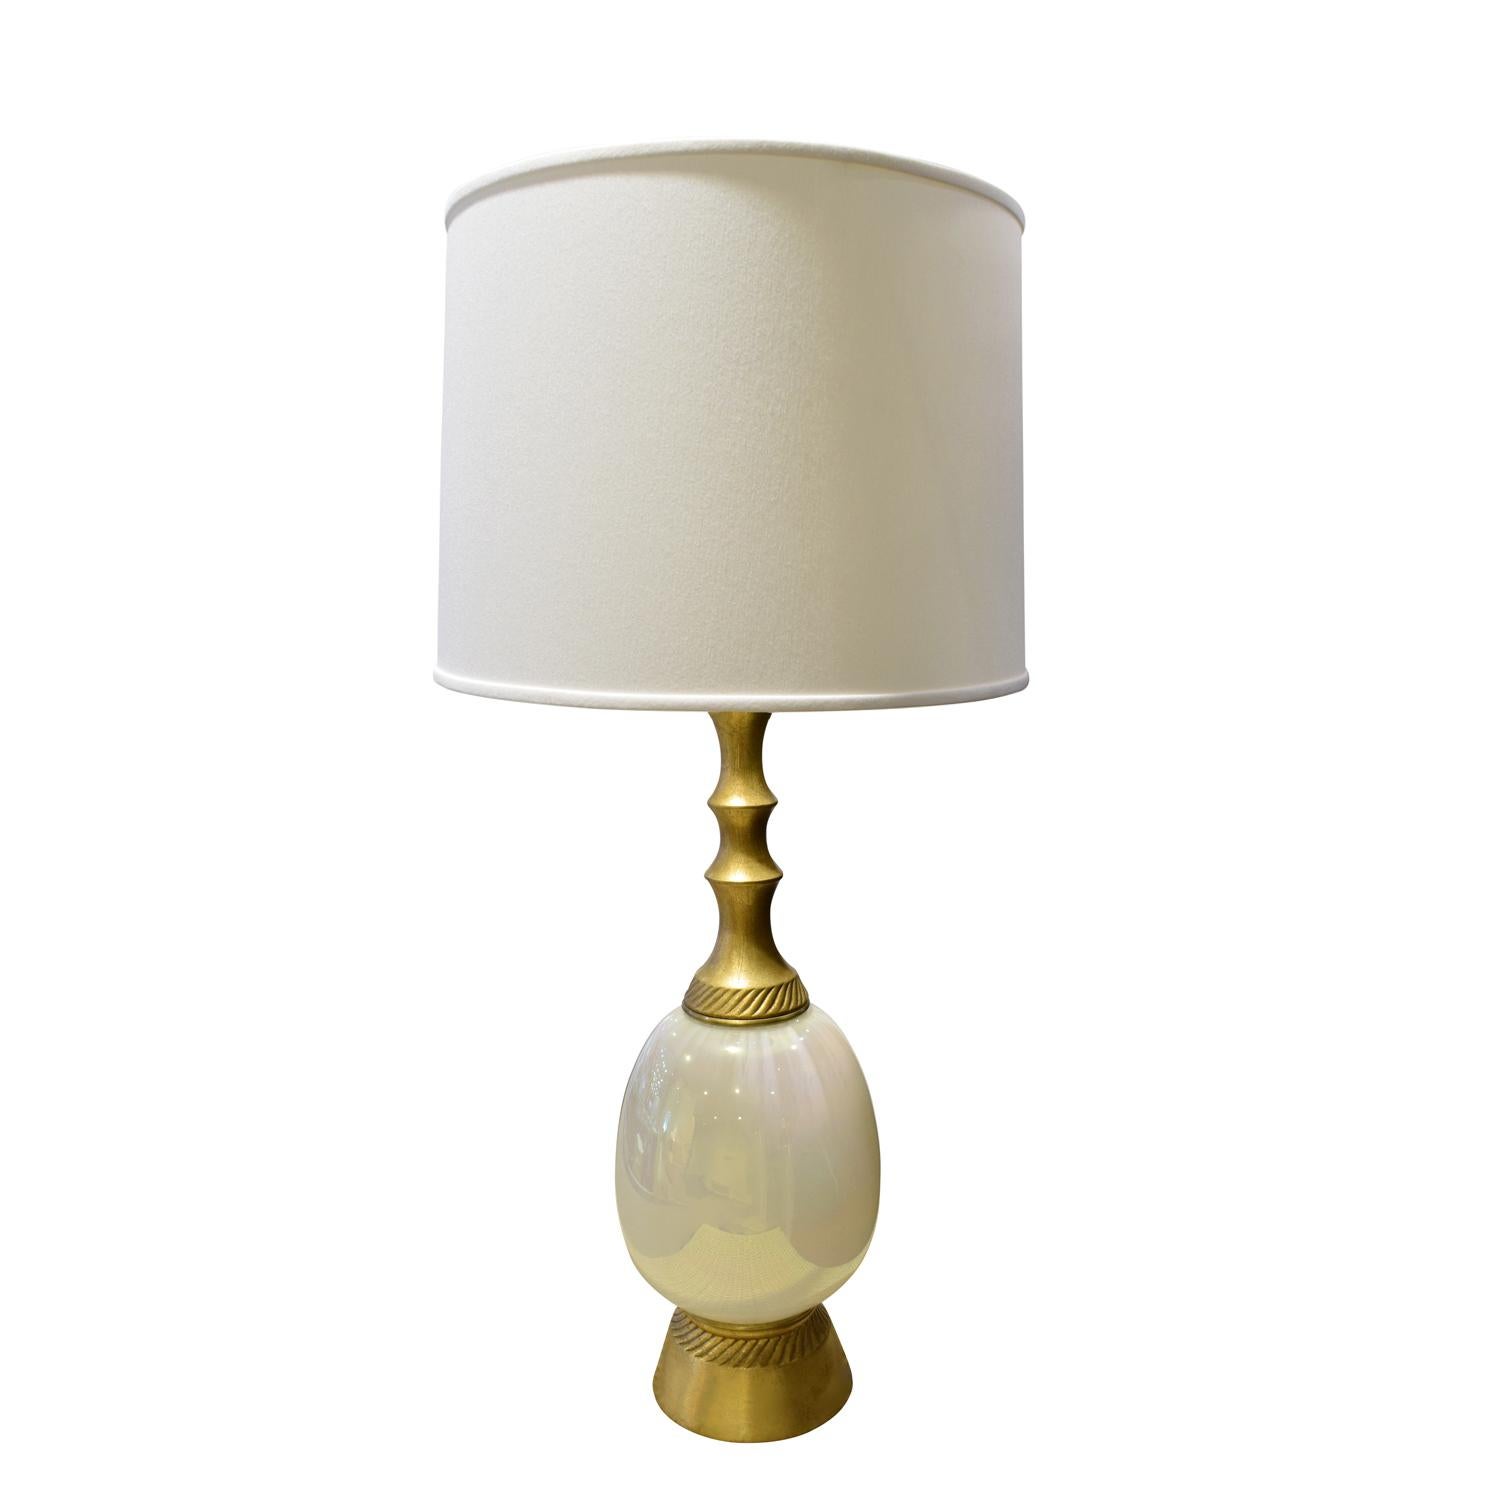 Elegant table lamp, gilded with opaline glass, by F.A.I.P., American, 1950s (signed on base).

Measures:
Shade diameter 18 inches
Shade height 12 inches.